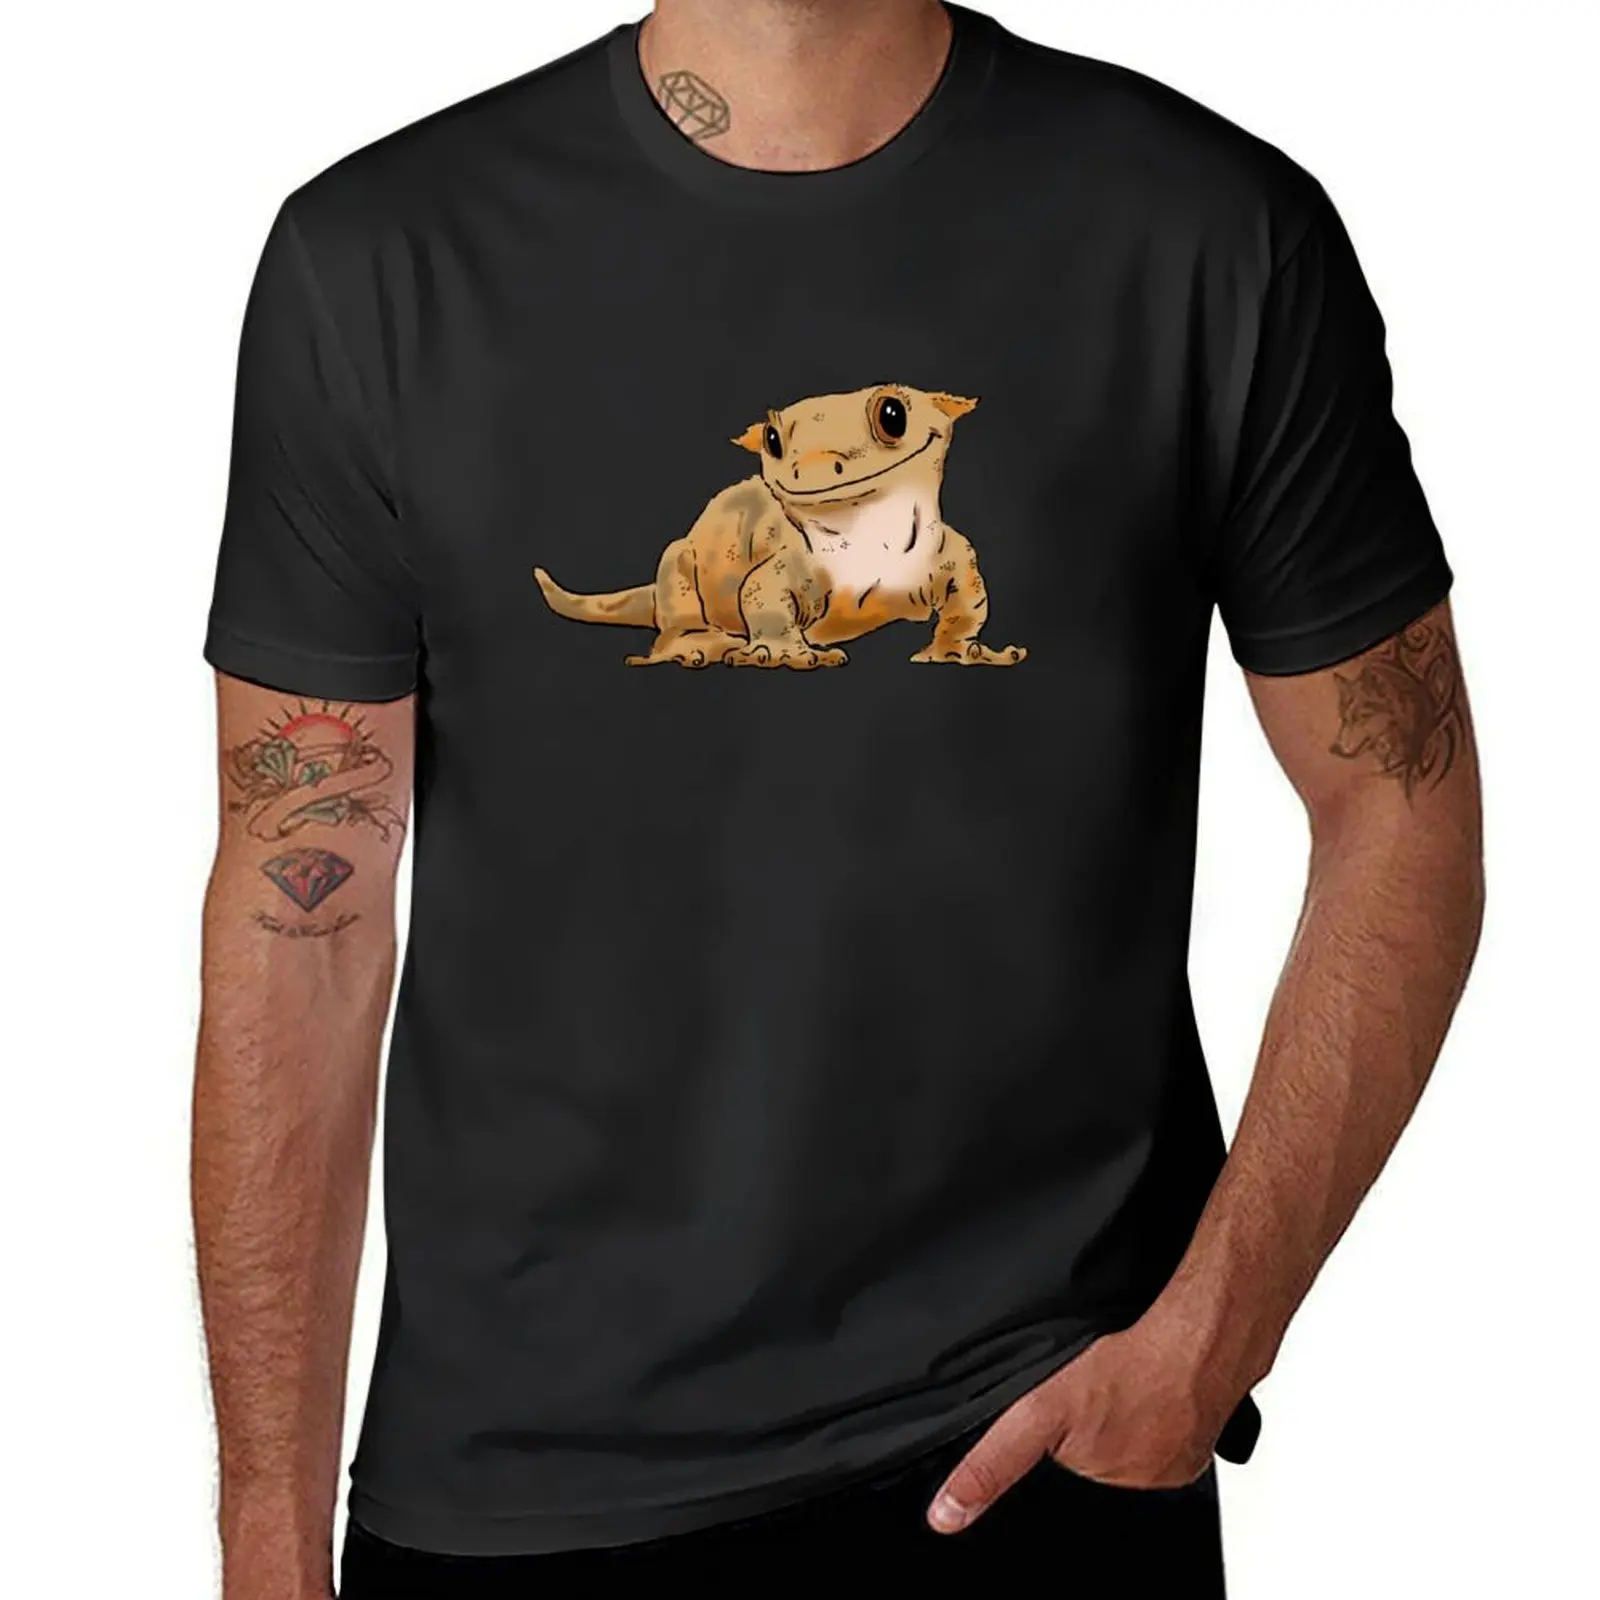 

Smiling Crested Gecko, Cute Crested Gecko, Crestie Lover T-shirt funnys tops funny t shirts for men